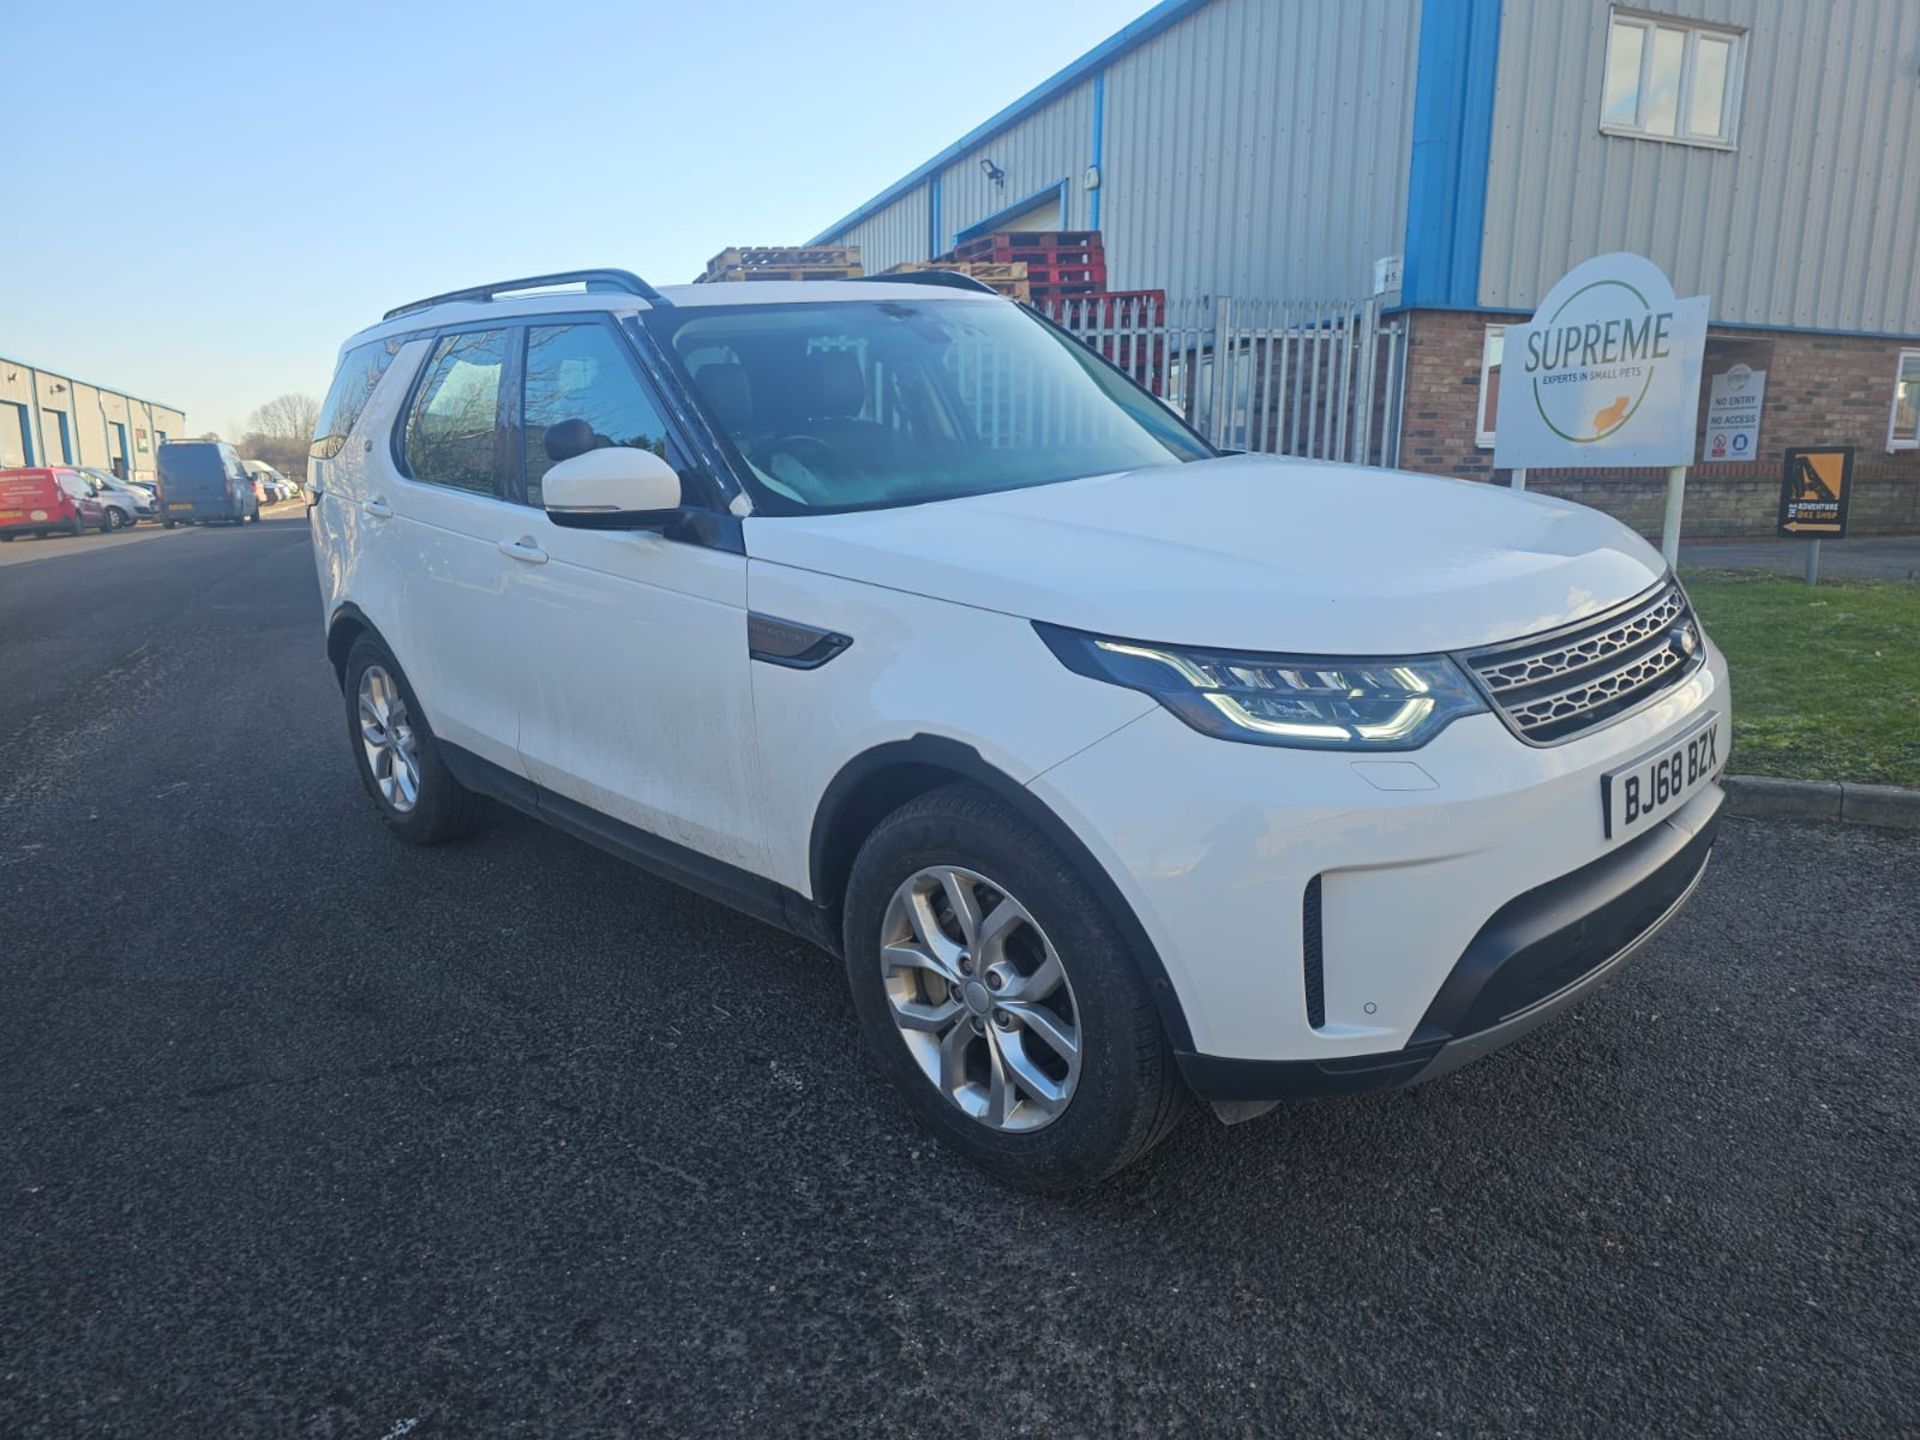 2018 DISCOVERY 5 SE RUNS AND DRIVES PERFECTLY